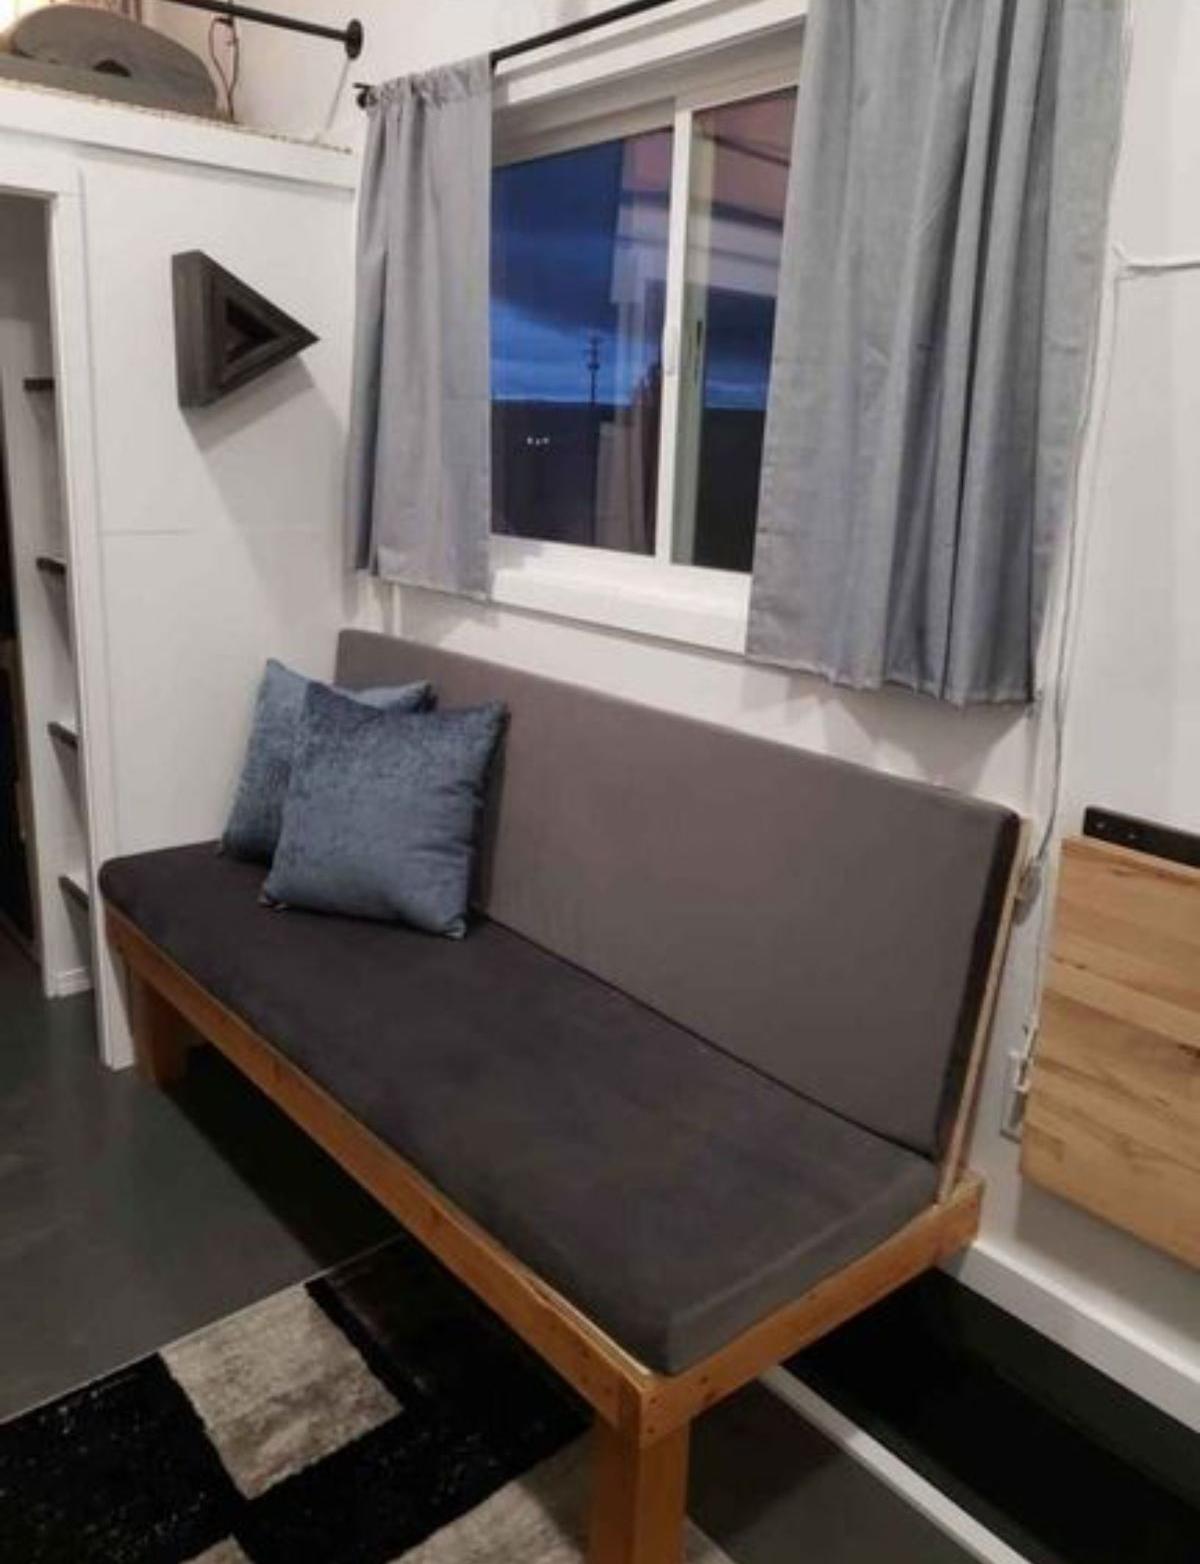 Living area of double-lofted tiny home